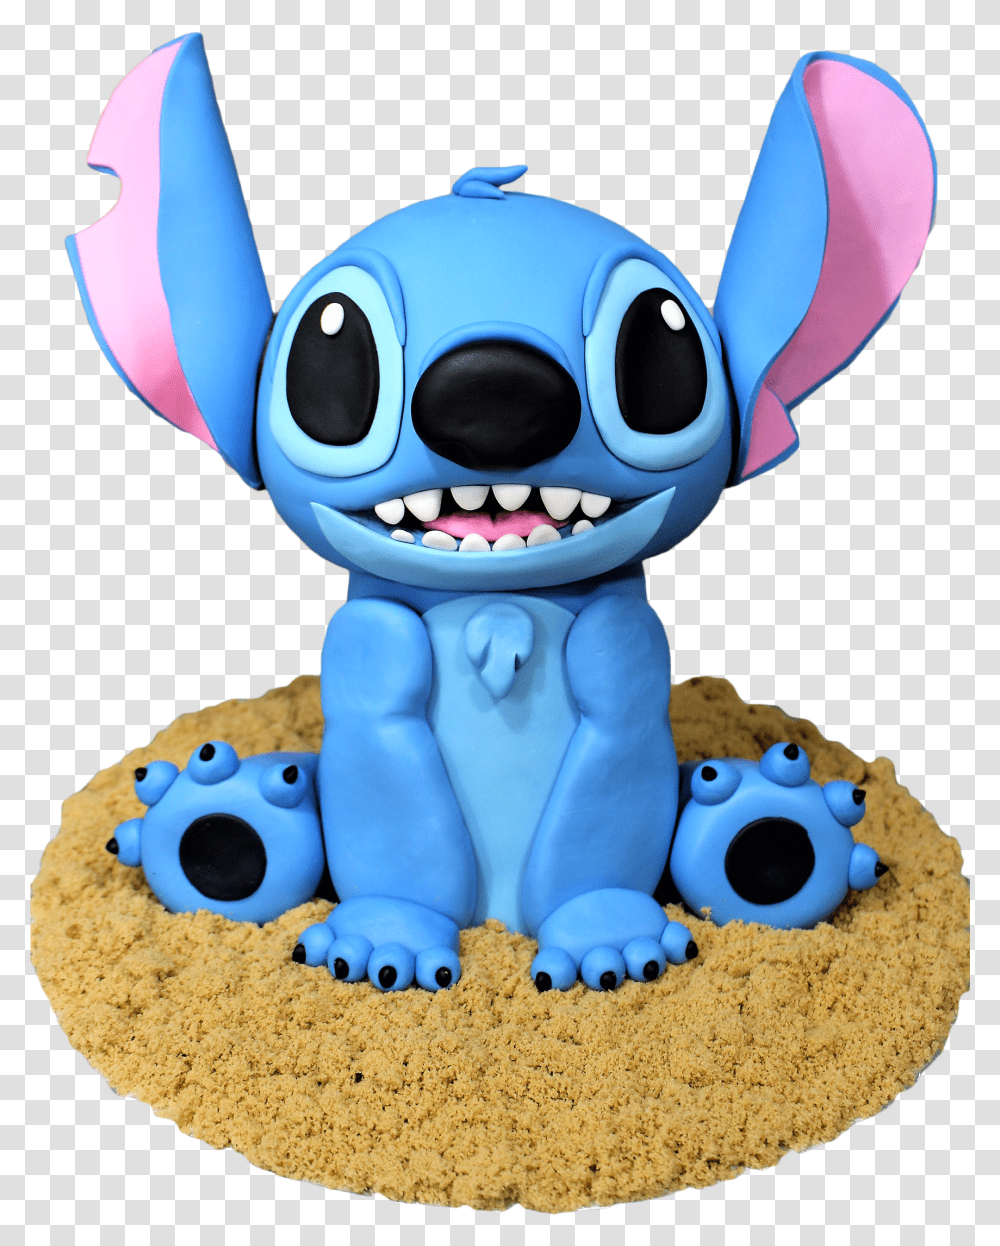 Lilo And Stitch Cake Transparent Png